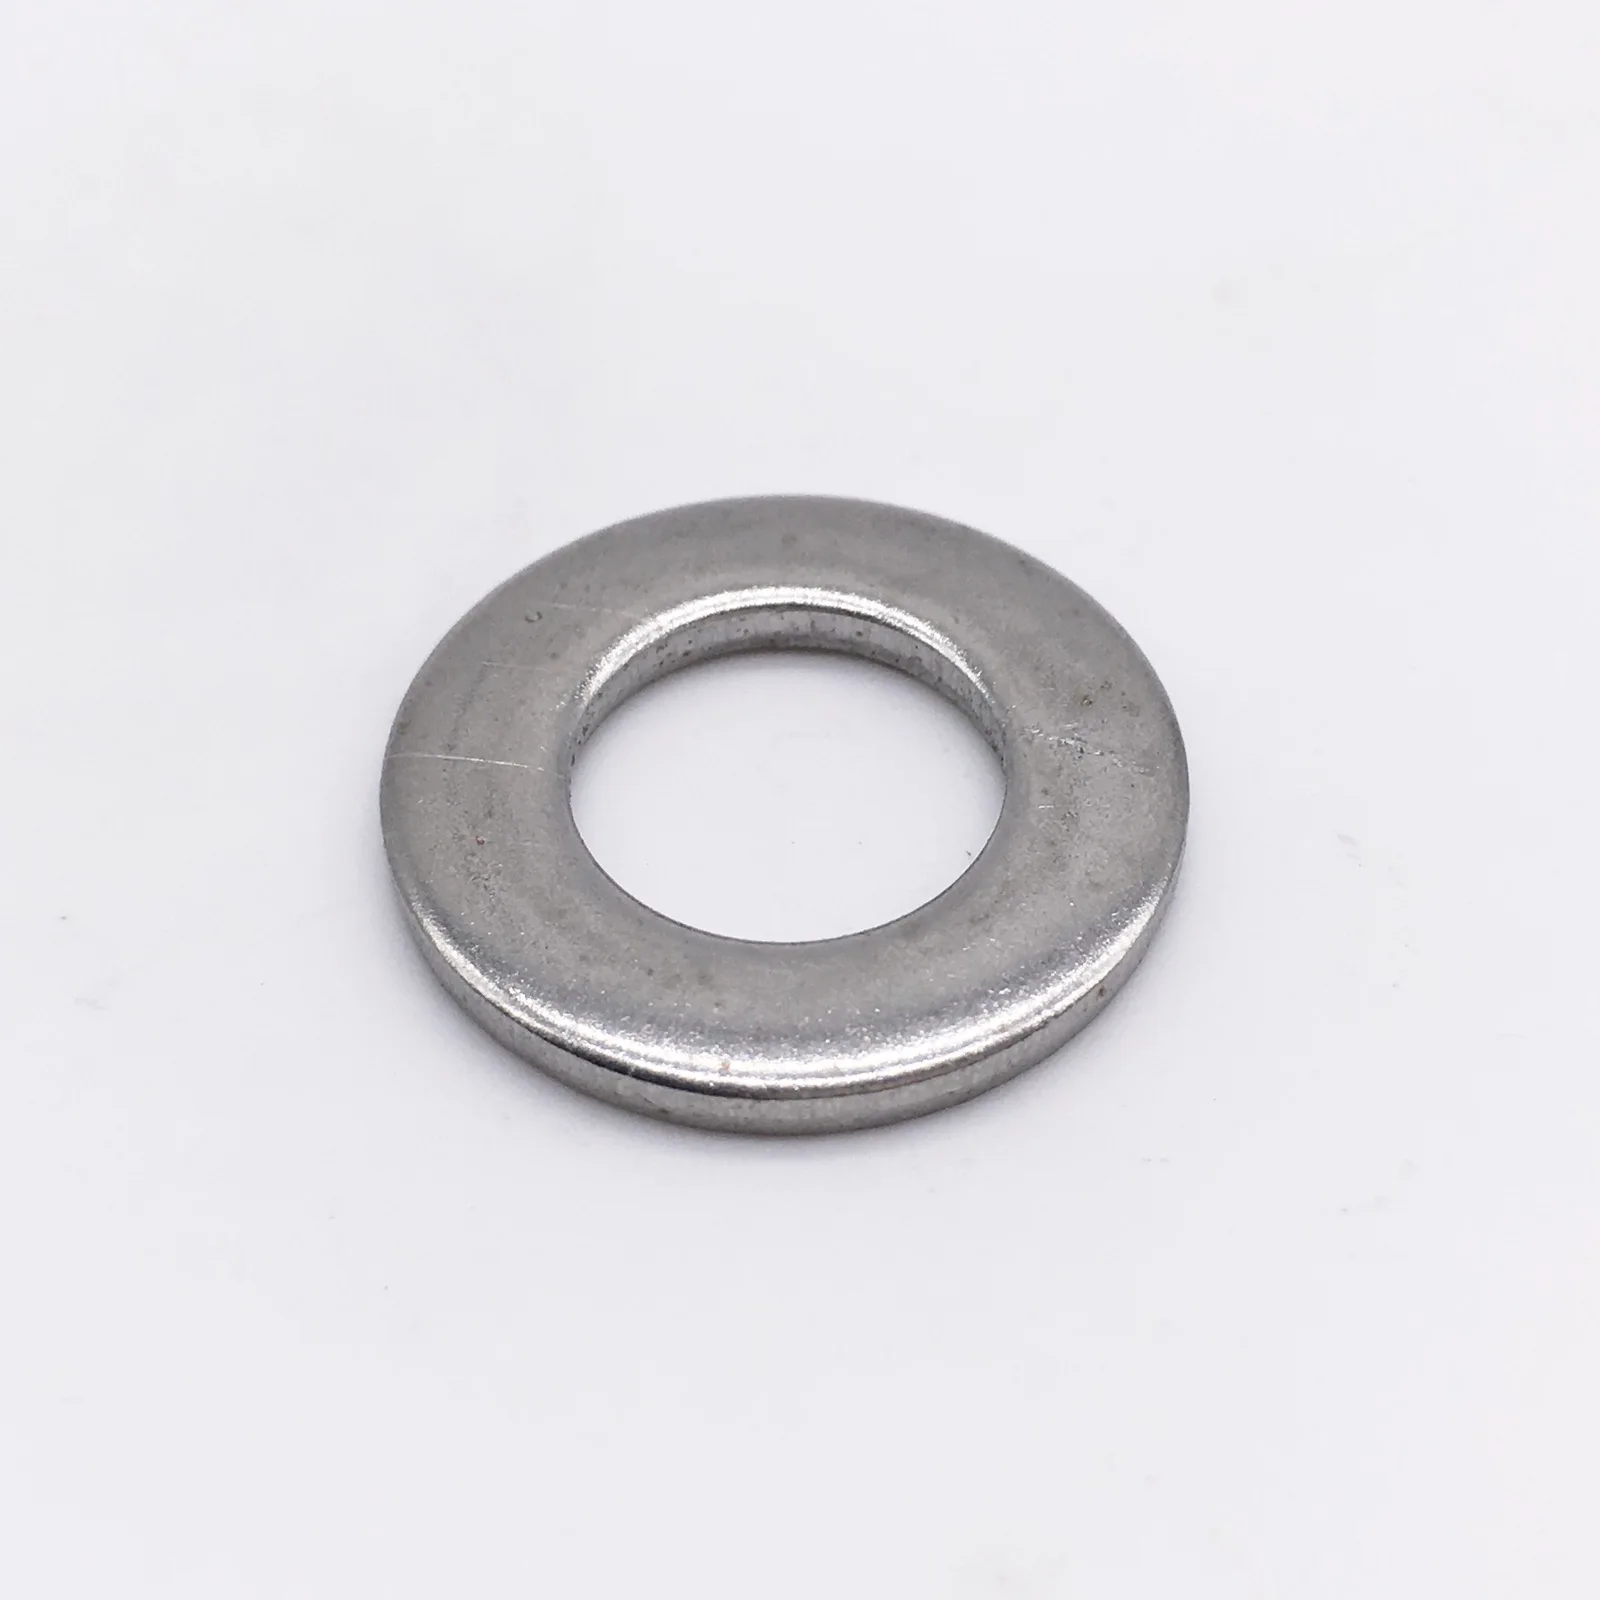 6 to M36 Washers Stainless Steel A2 DIN 125 ♥ U Disc washer M1 